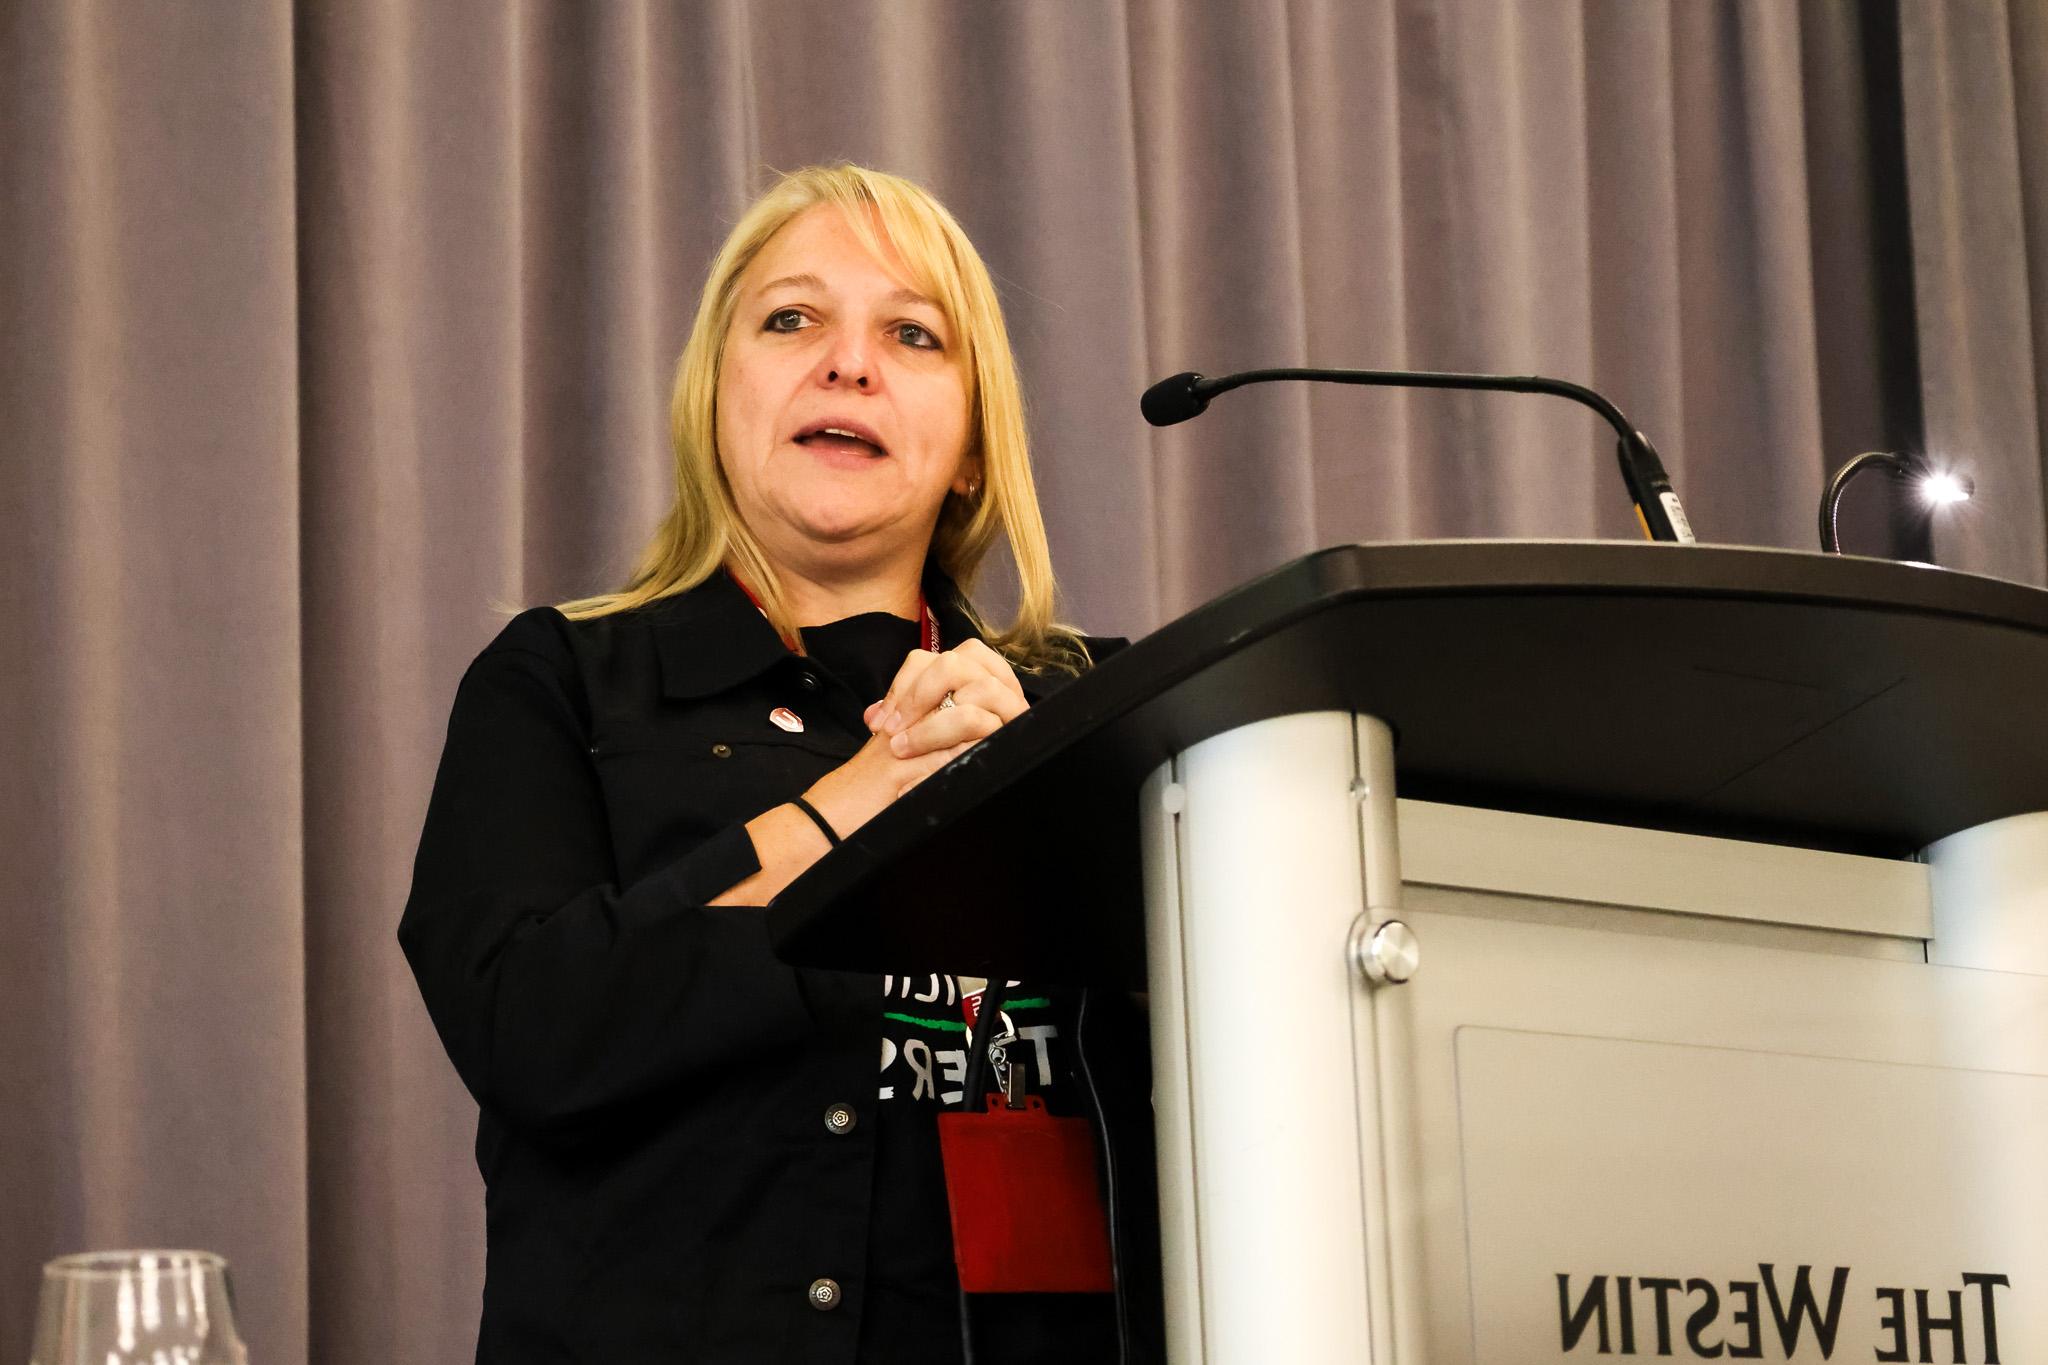 A women speaks at a podium